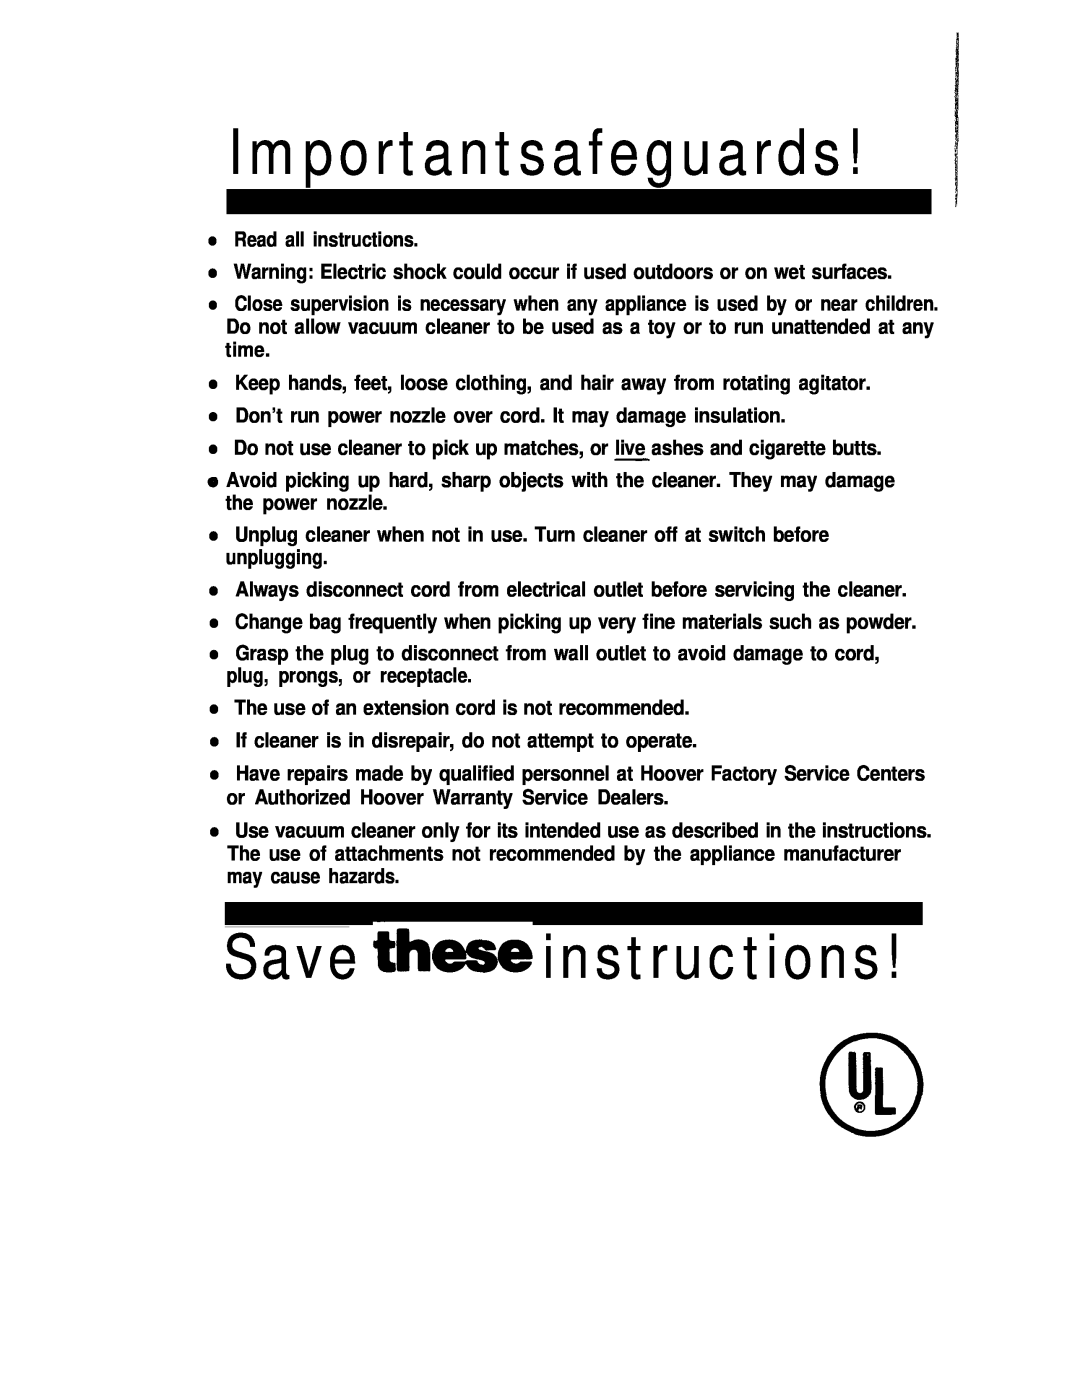 Hoover S3083-030 manual Save these instructions, Importantsafeguards 